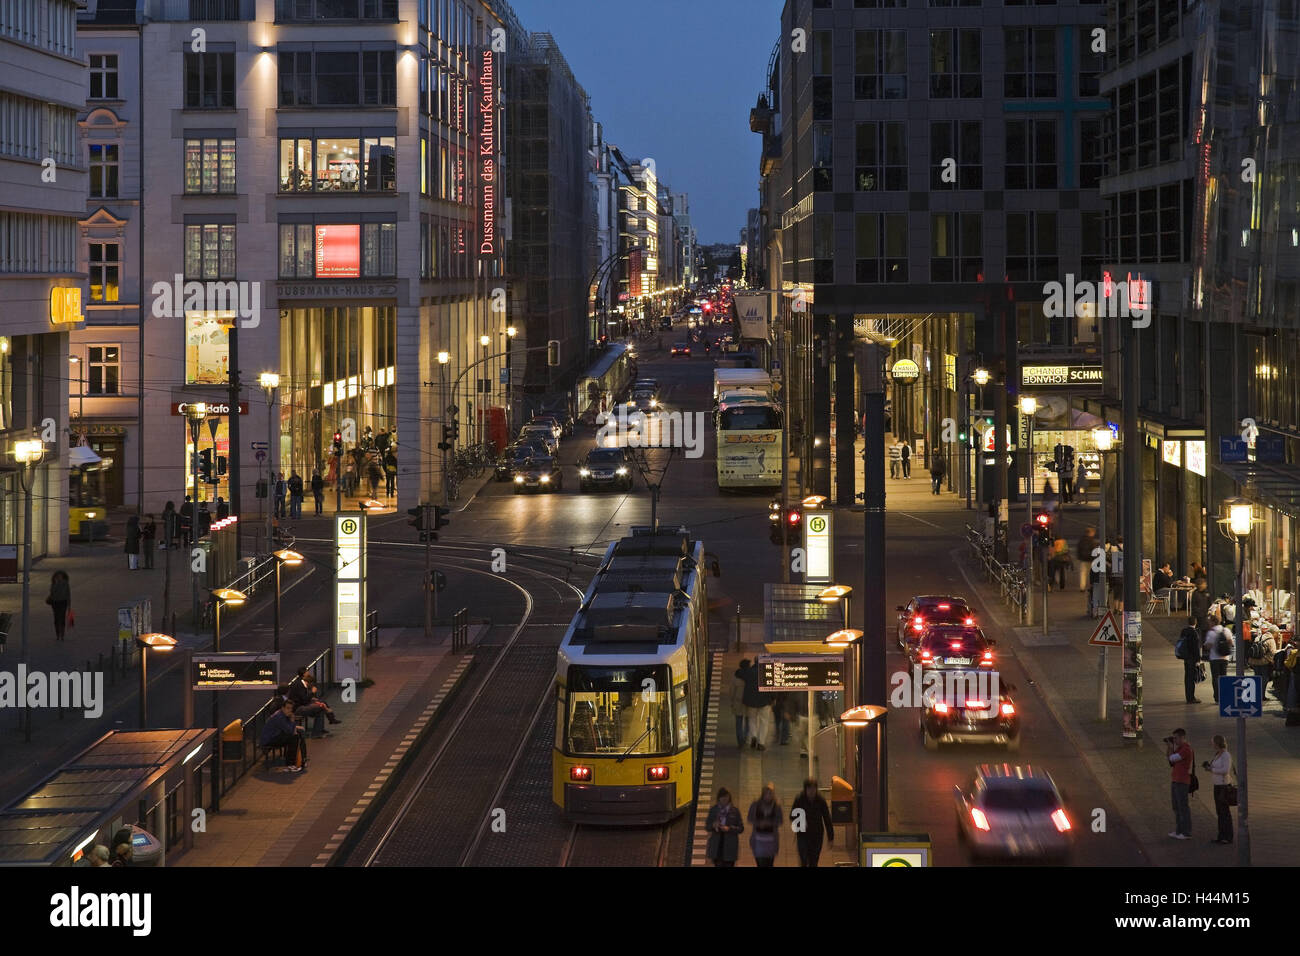 Germany, Berlin, Friedrichstrasse, traffic, lights, evening, town, capital, part town, street, architecture, building, cars, streetcar, means transportation, lights, pedestrians, people, outside, Stock Photo